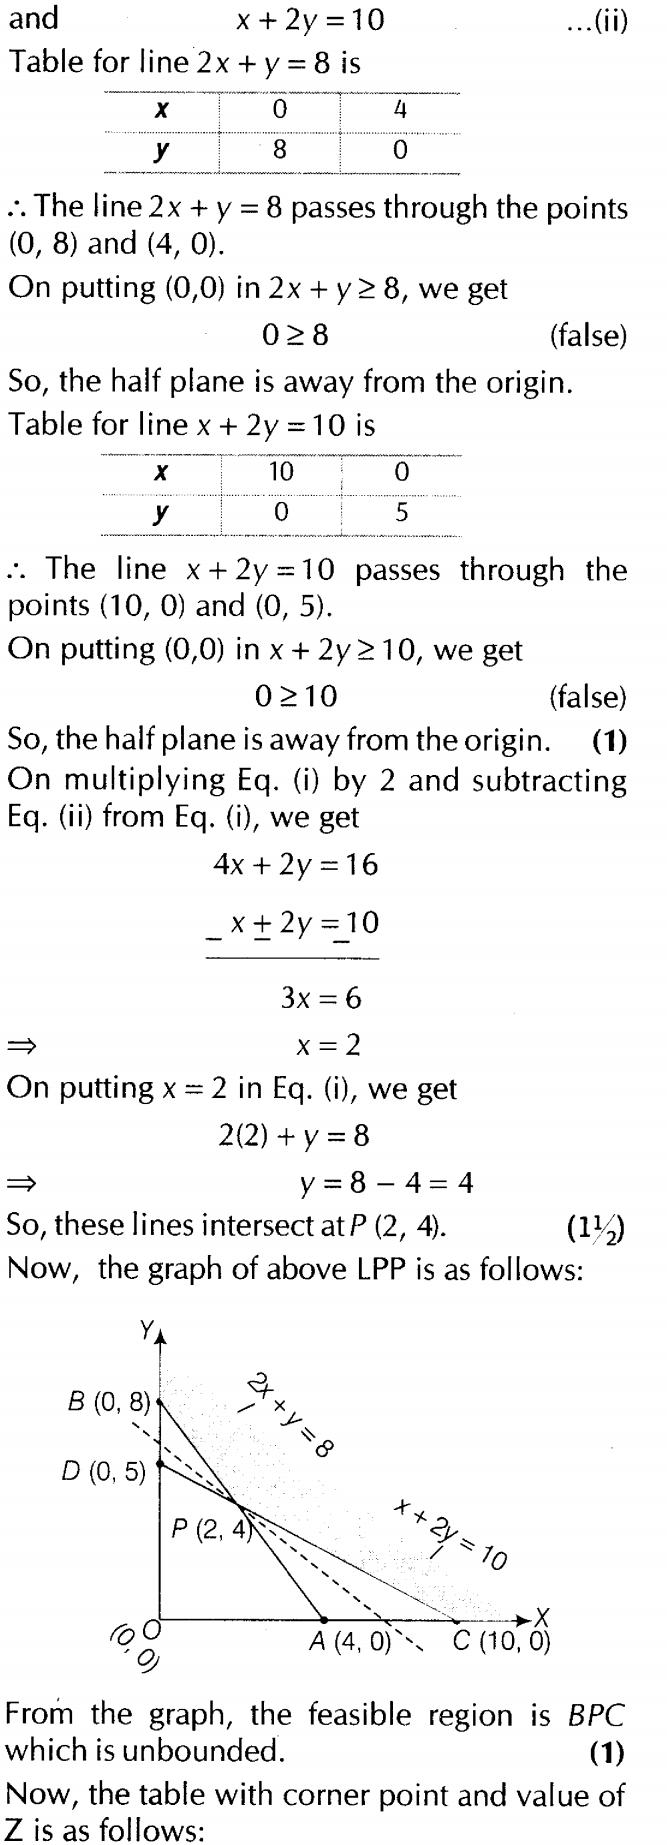 important-questions-for-class-12-maths-cbse-linear-programming-t1-q-10ssjpg_Page1